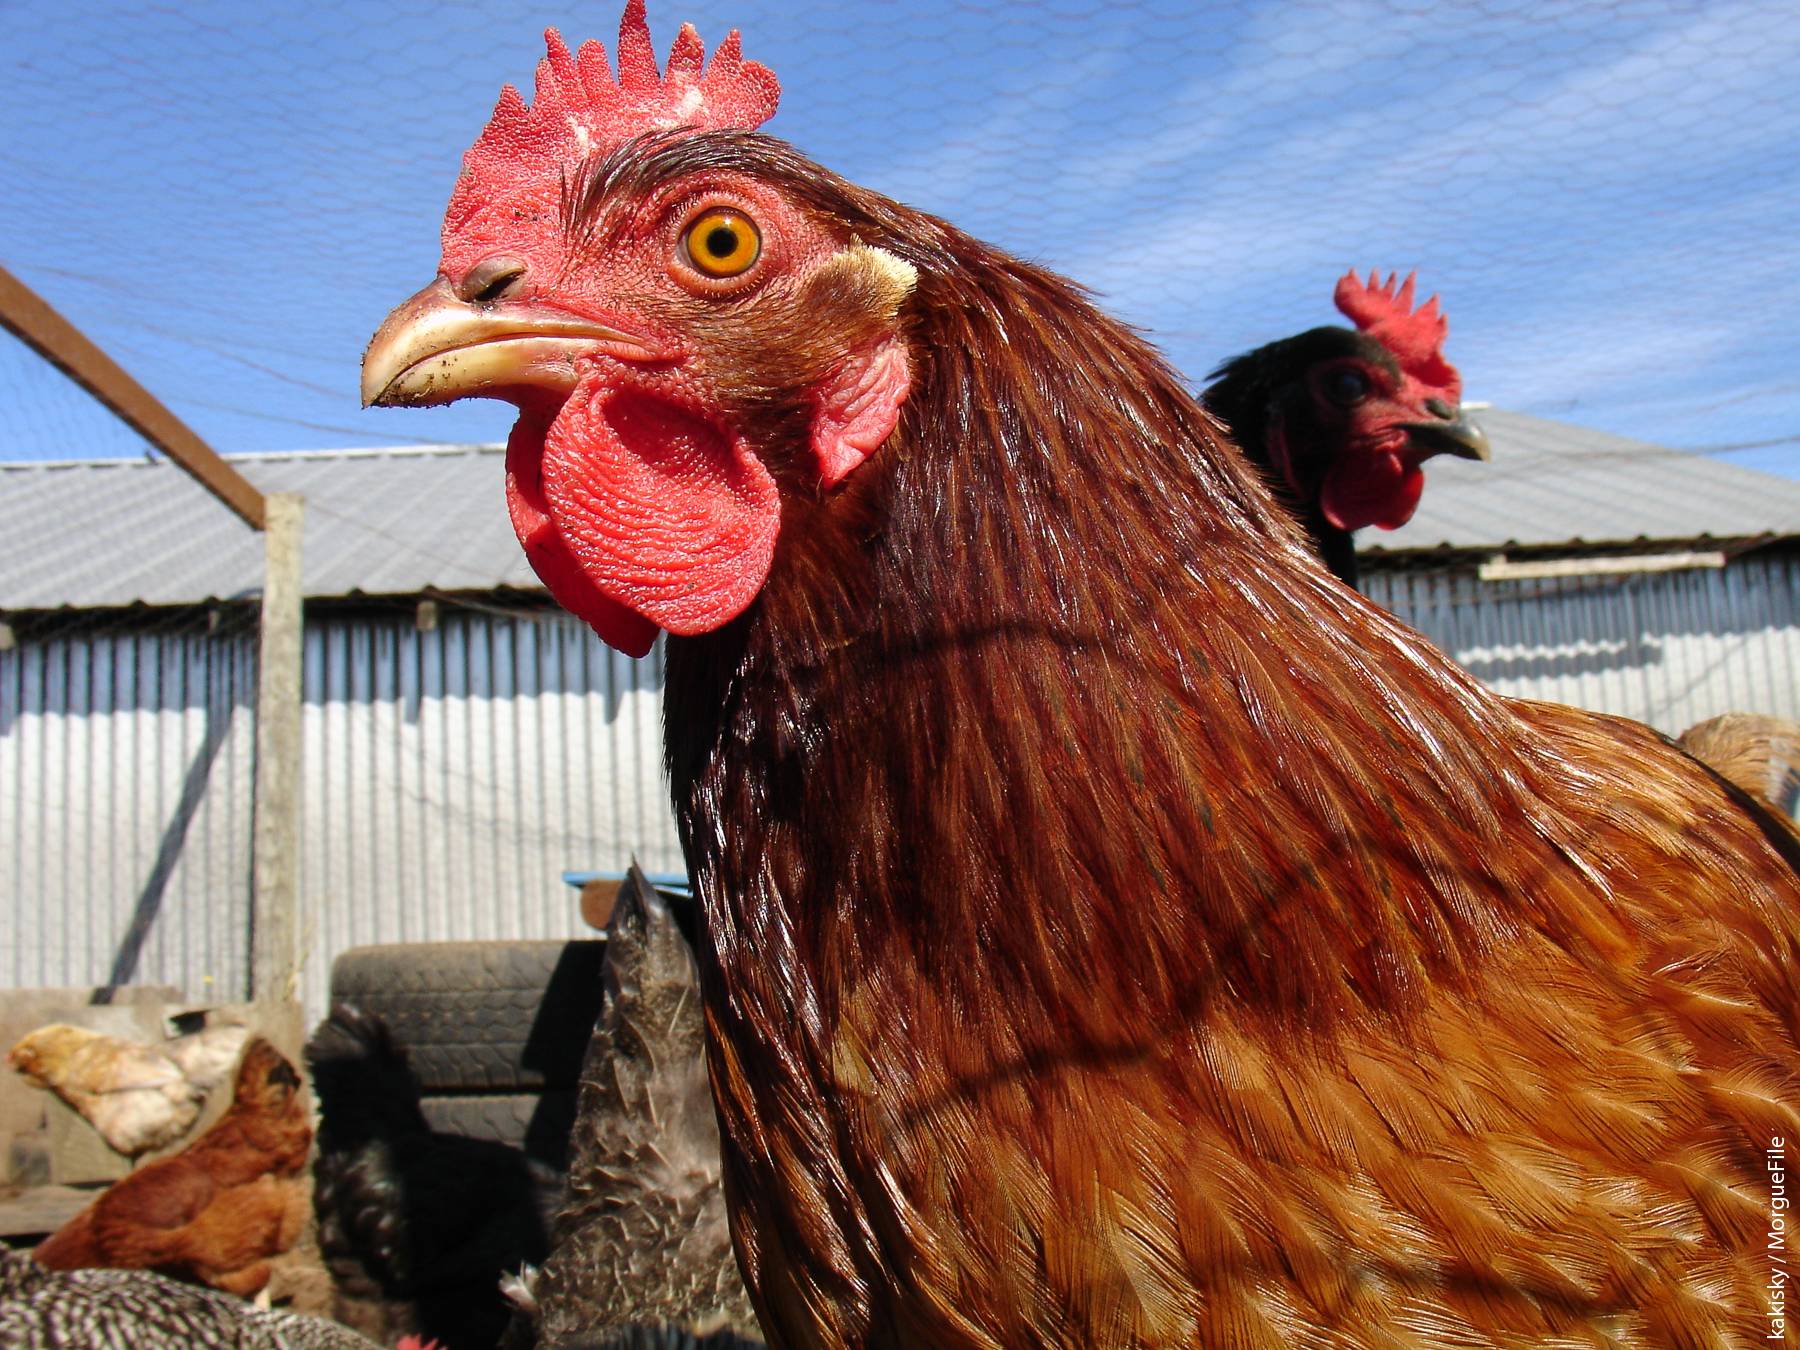 The CAHFS lab in San Bernardino was instrumental in the diagnosis and eradication efforts during the 2002–2003 outbreak of exotic Newcastle disease, which was originally diagnosed in a backyard chicken.